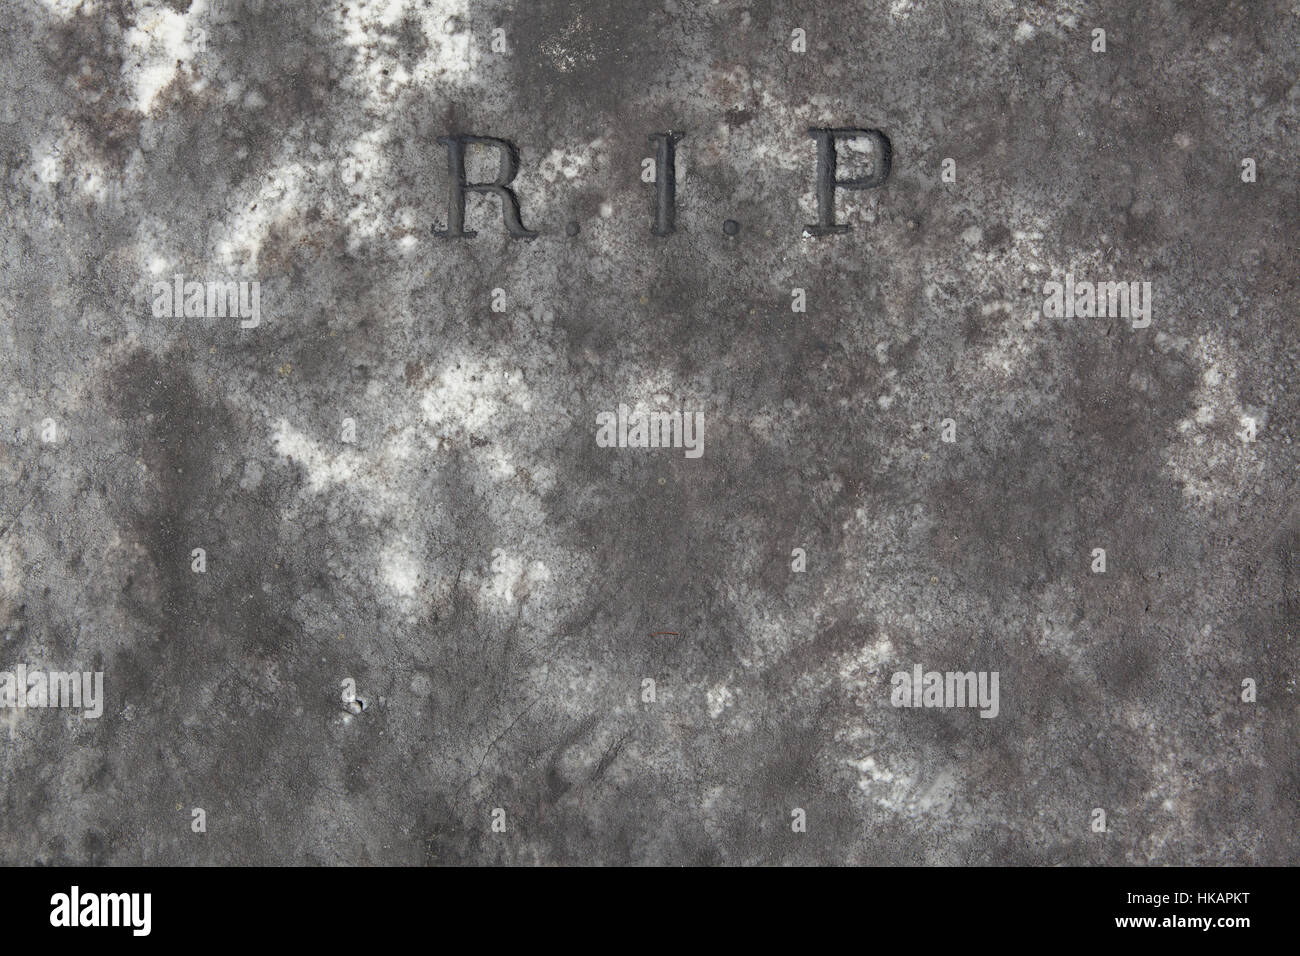 RIP. Rest in peace. Traditional inscription on the grave. Stock Photo